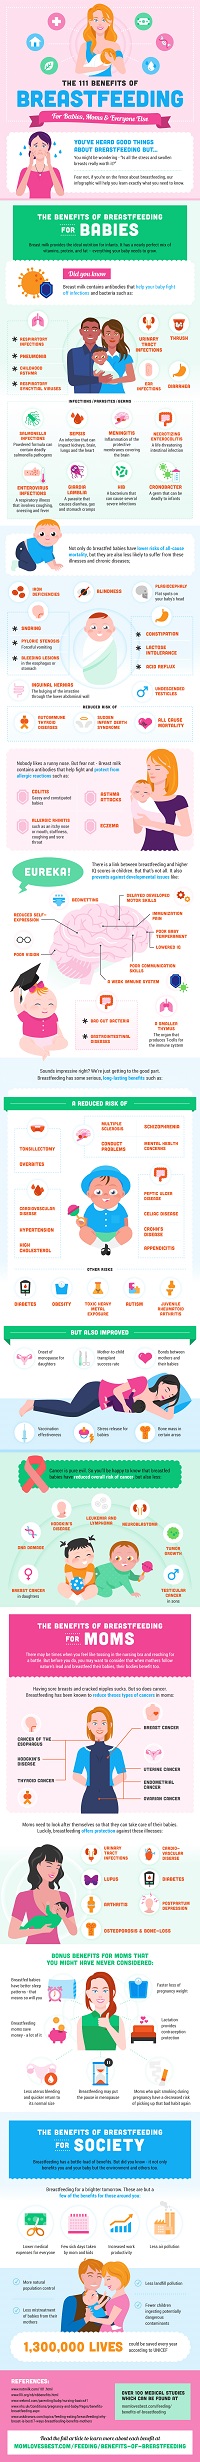 Image: The Benefits Of Breastfeeding Infographic by Mom Loves Best